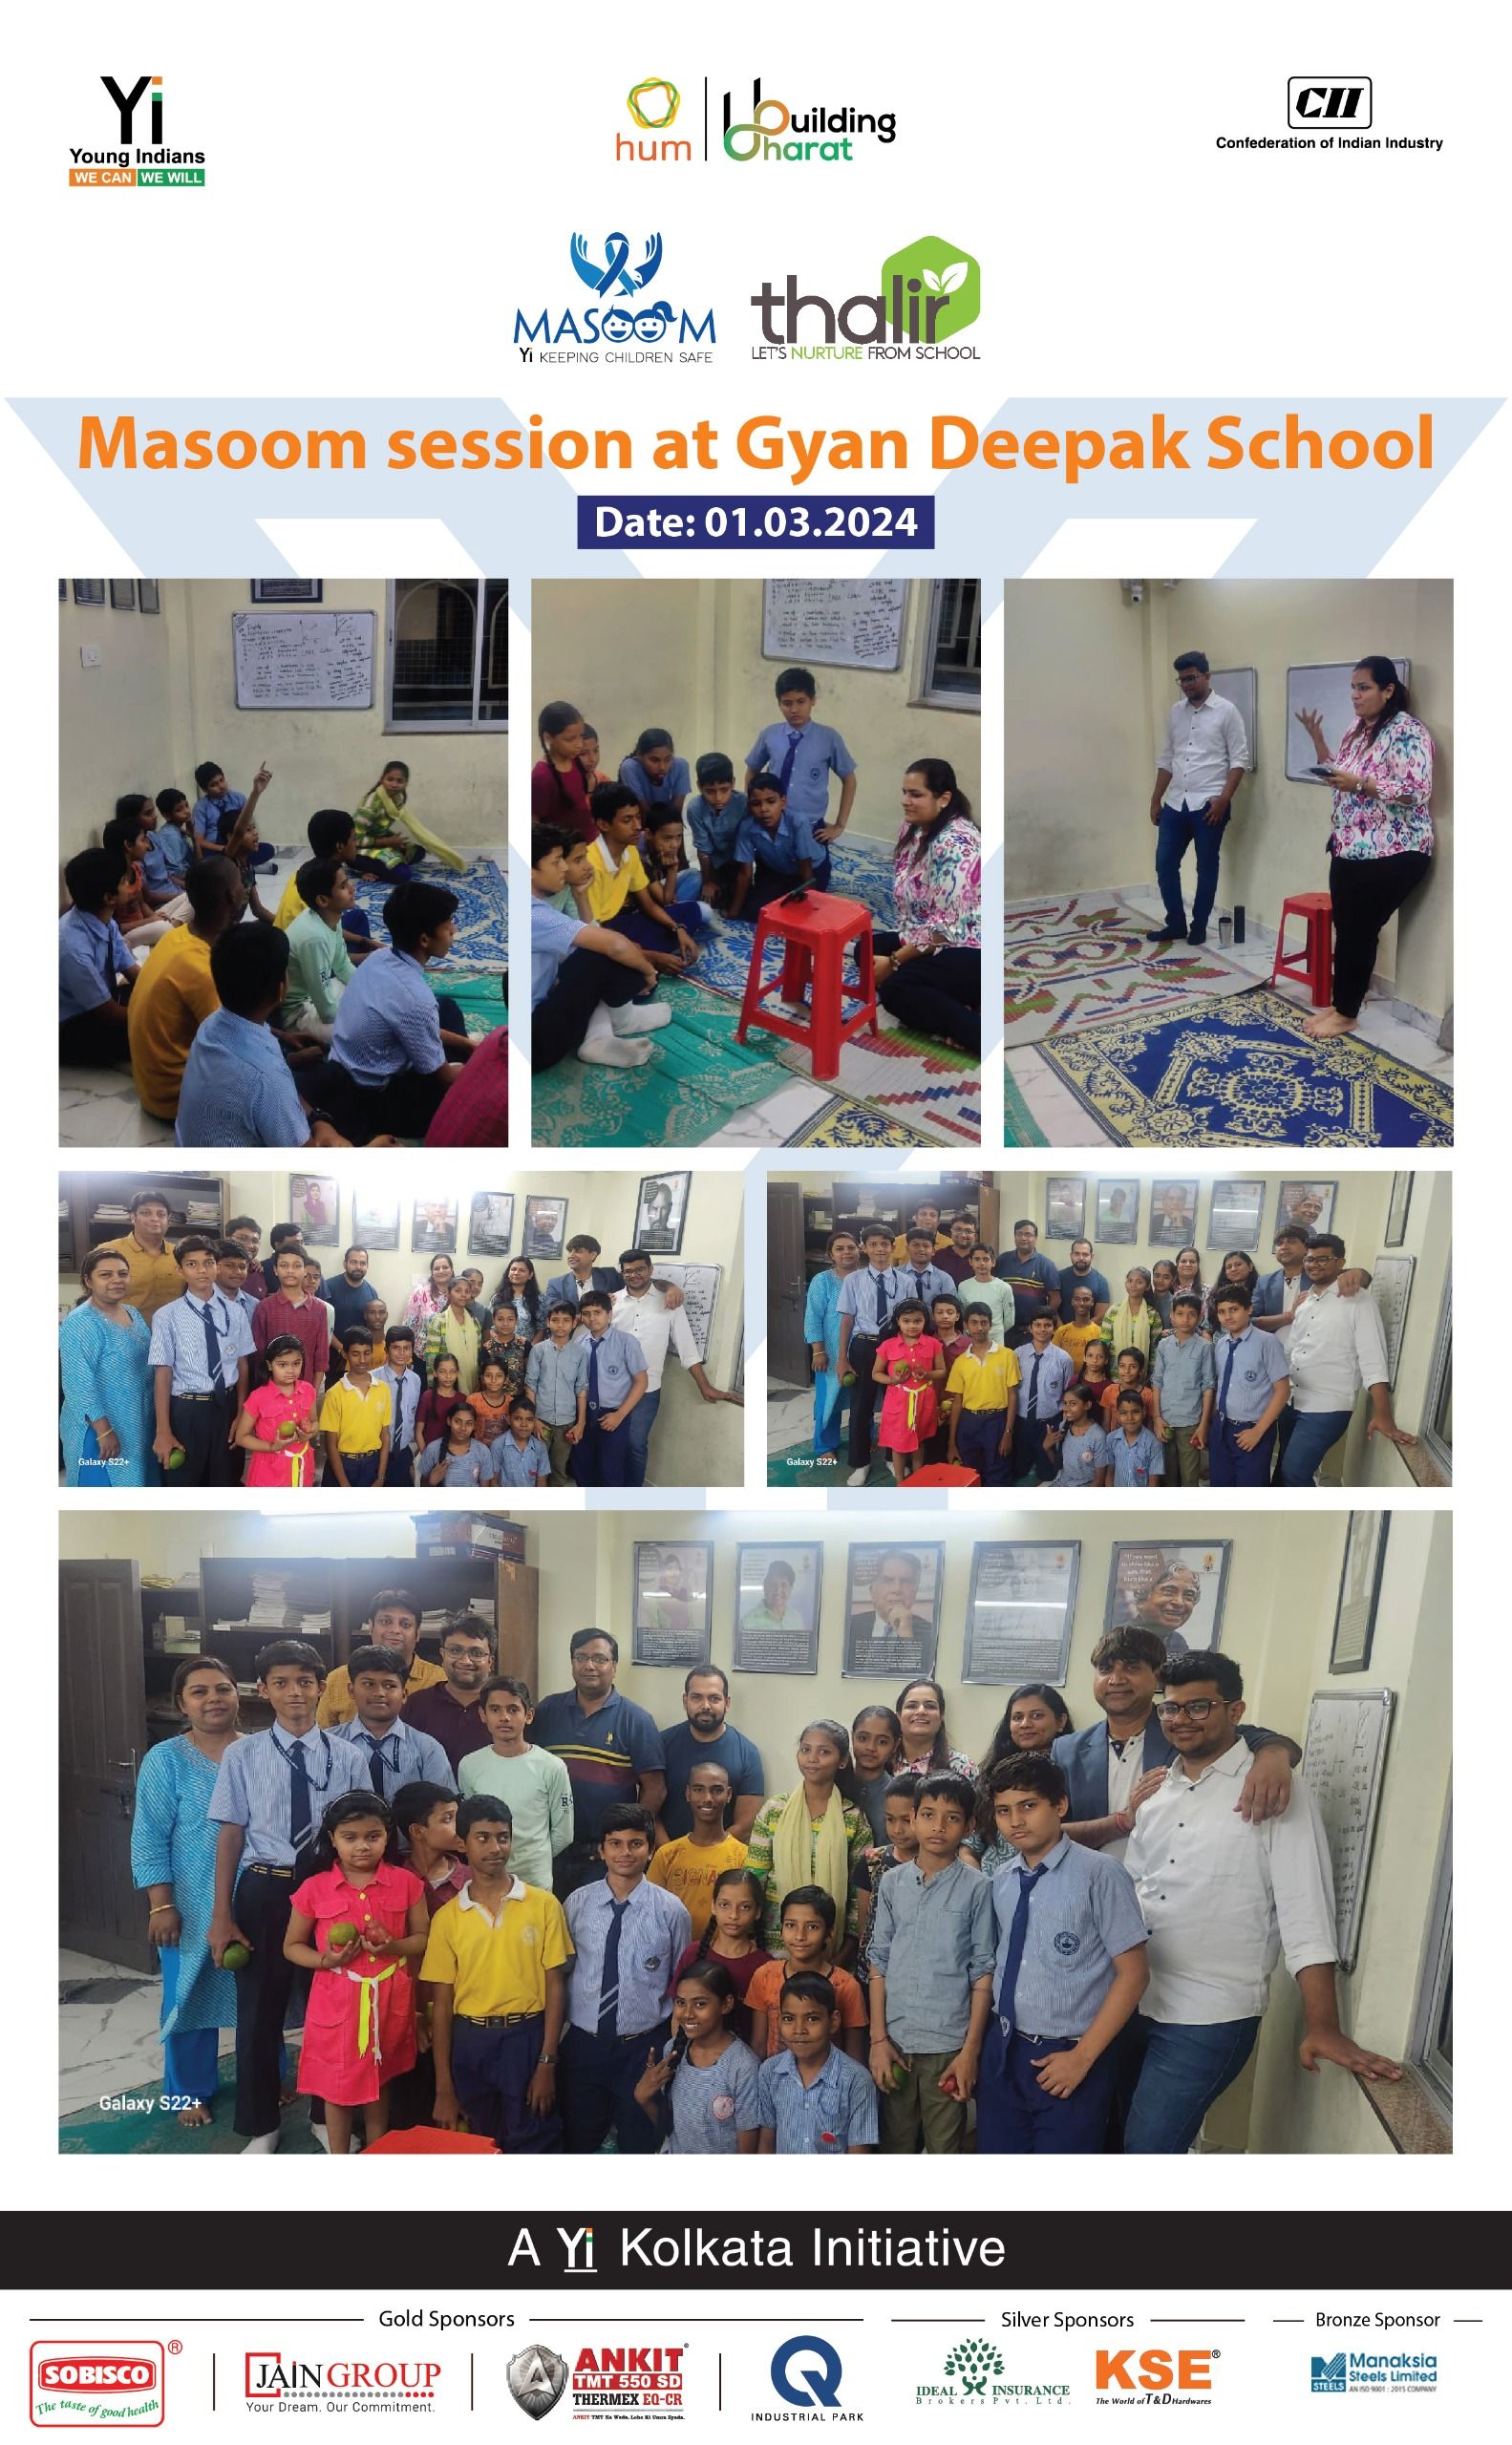 Yi24 | Awareness Session on Safe and Unsafe Touch - Gyan Deepak School